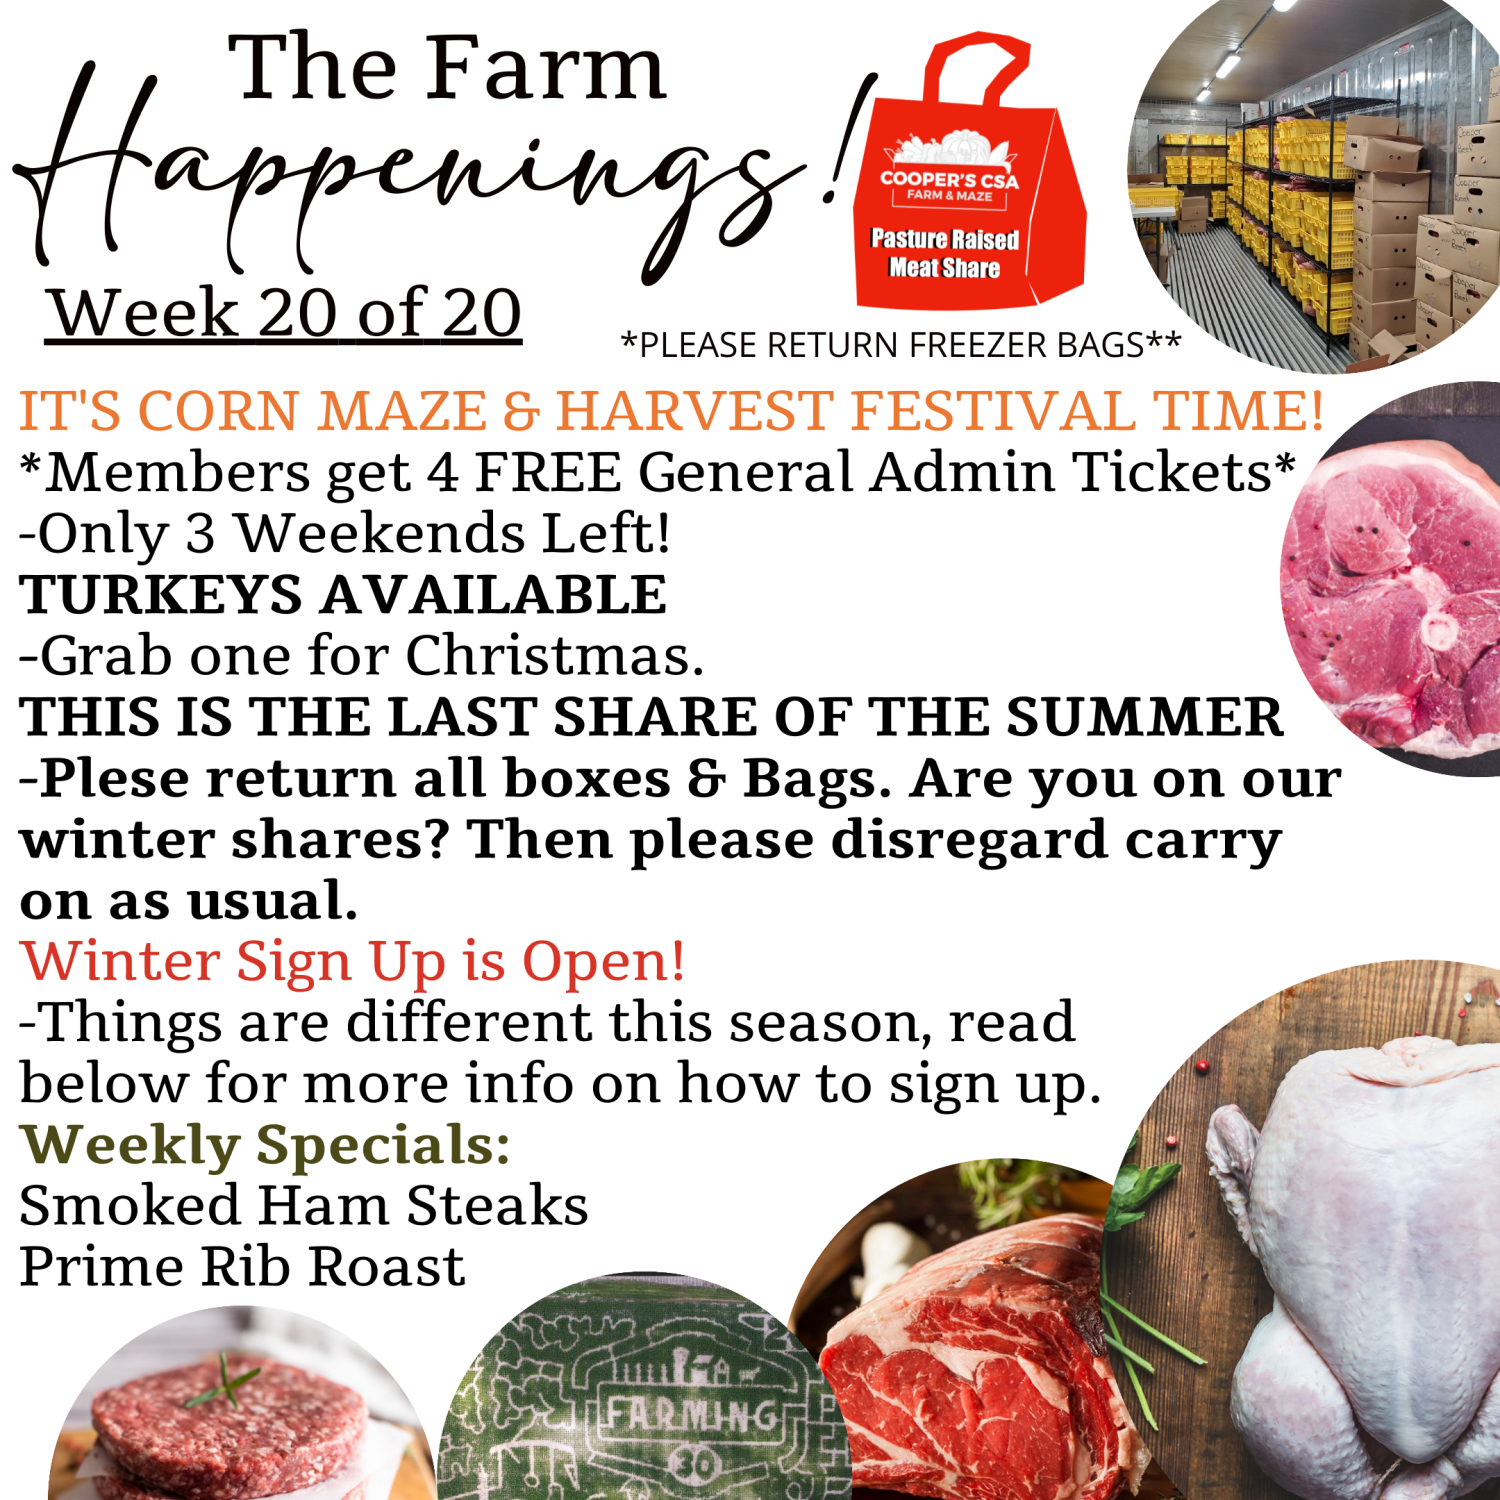 "Pasture Meat Shares"-Coopers CSA Farm Farm Happenings Week 20